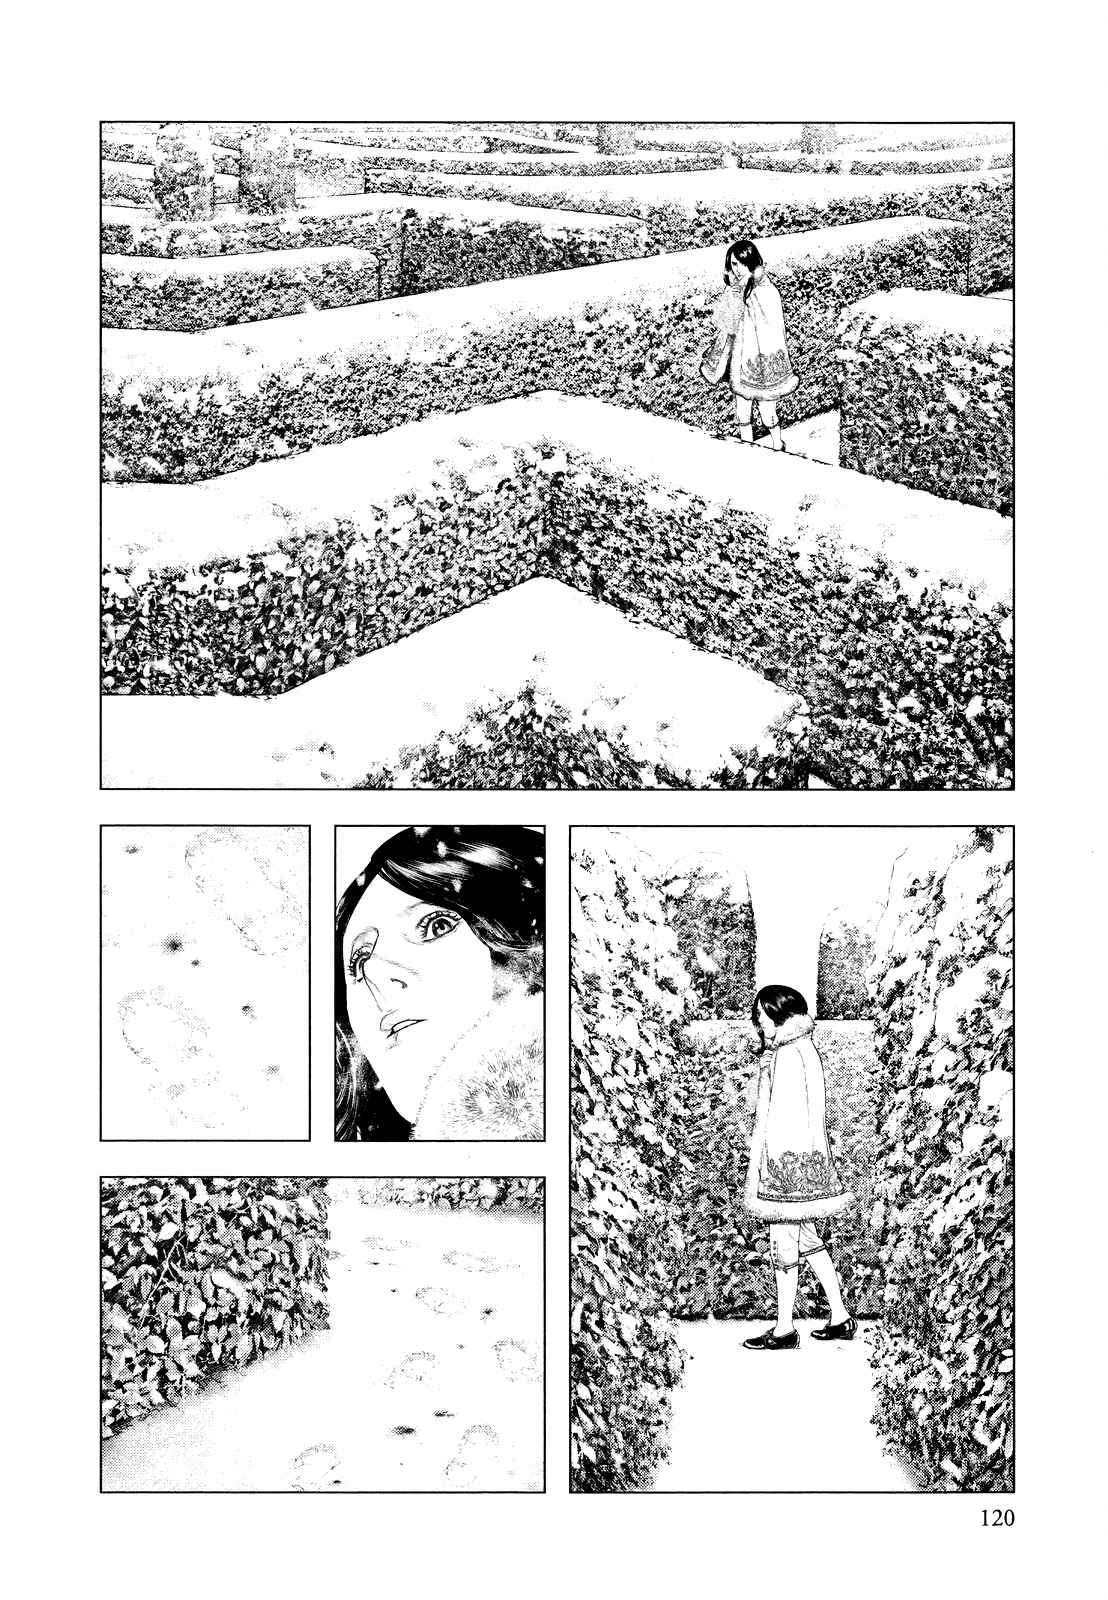 Innocent Vol. 2 Ch. 15 The "M"s of Two Houses